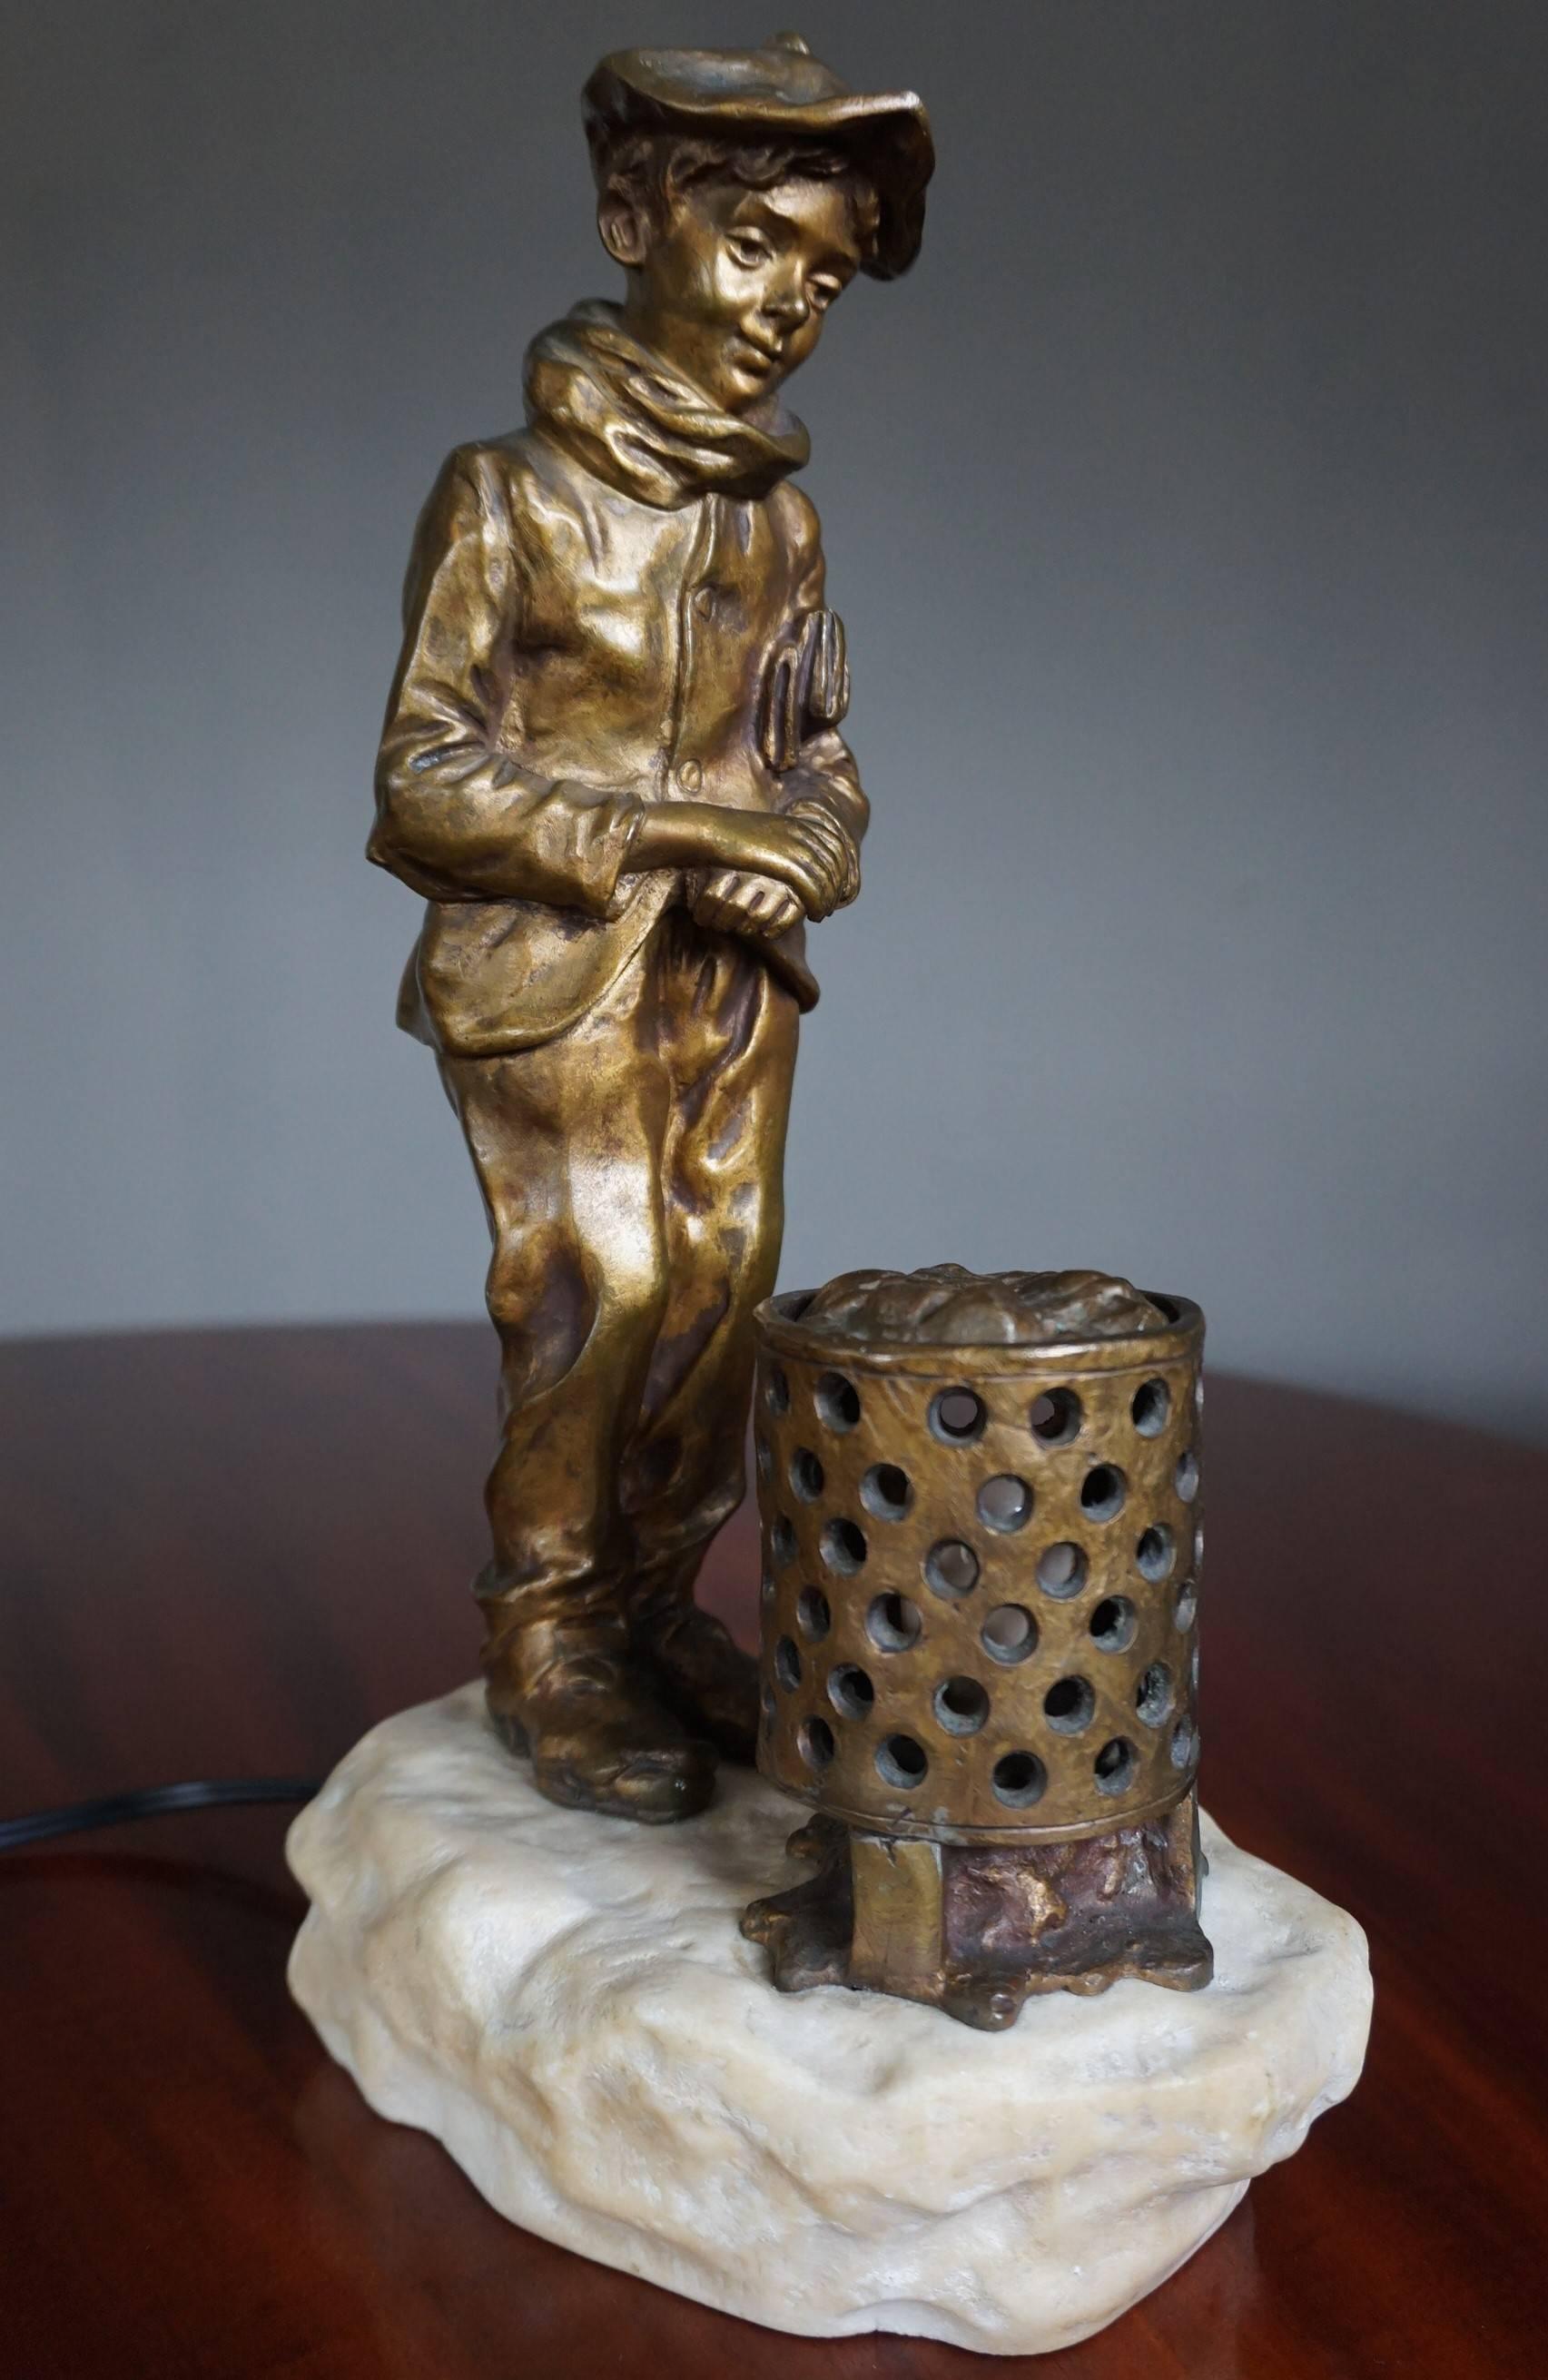 Rare José Cardona (1878-1923) and Ferdinand Levillain (1837-1905) sculptural table lamp.

This antique table or desk lamp embodies everything we love about art and antiques. The beautiful and realistic boy sculpture is a true work of art and for the